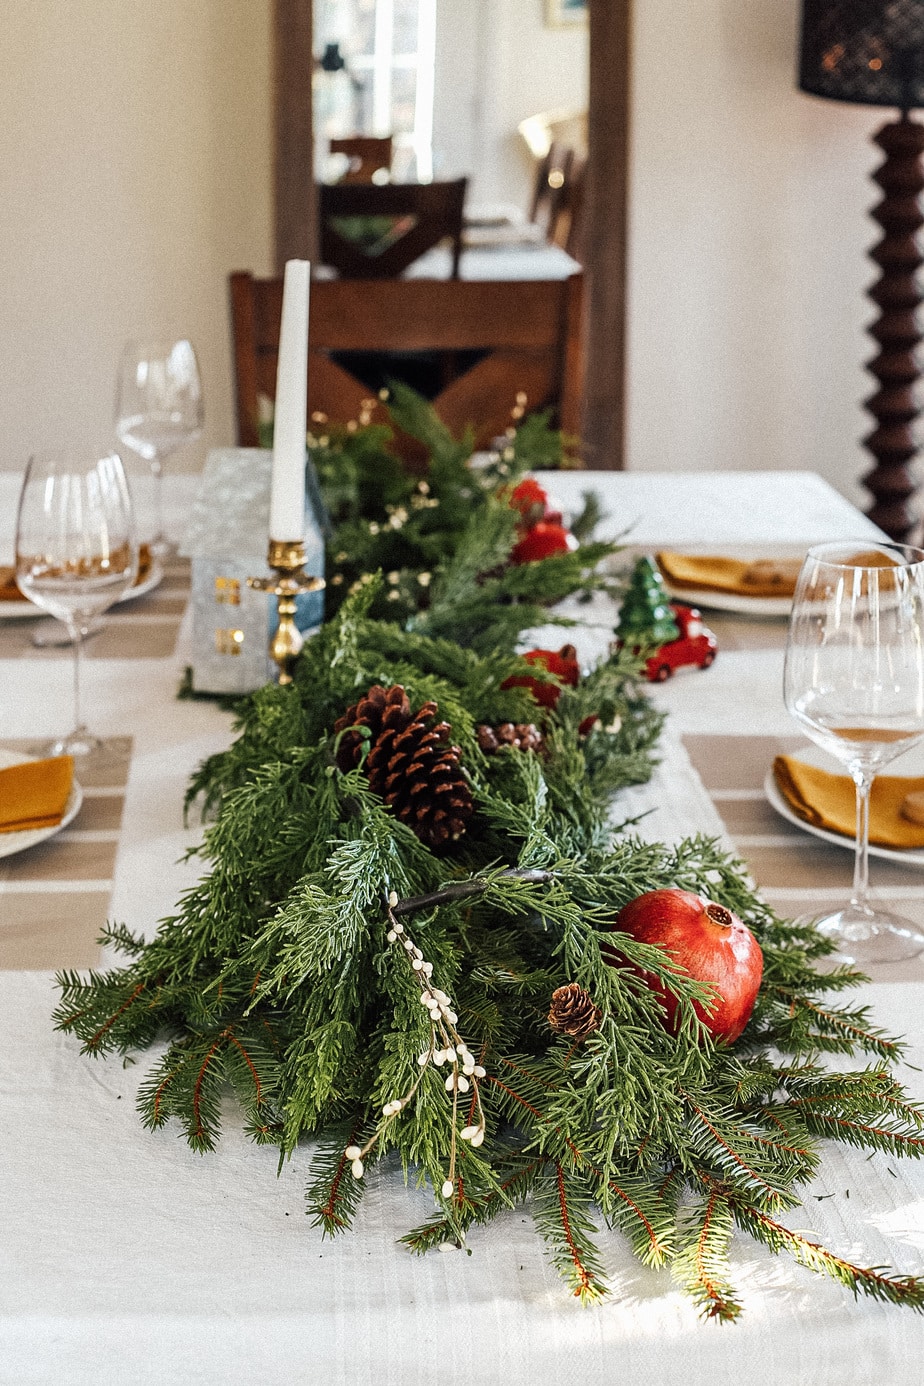 11+ Festive Tablescapes to Inspire your next Dinner Party